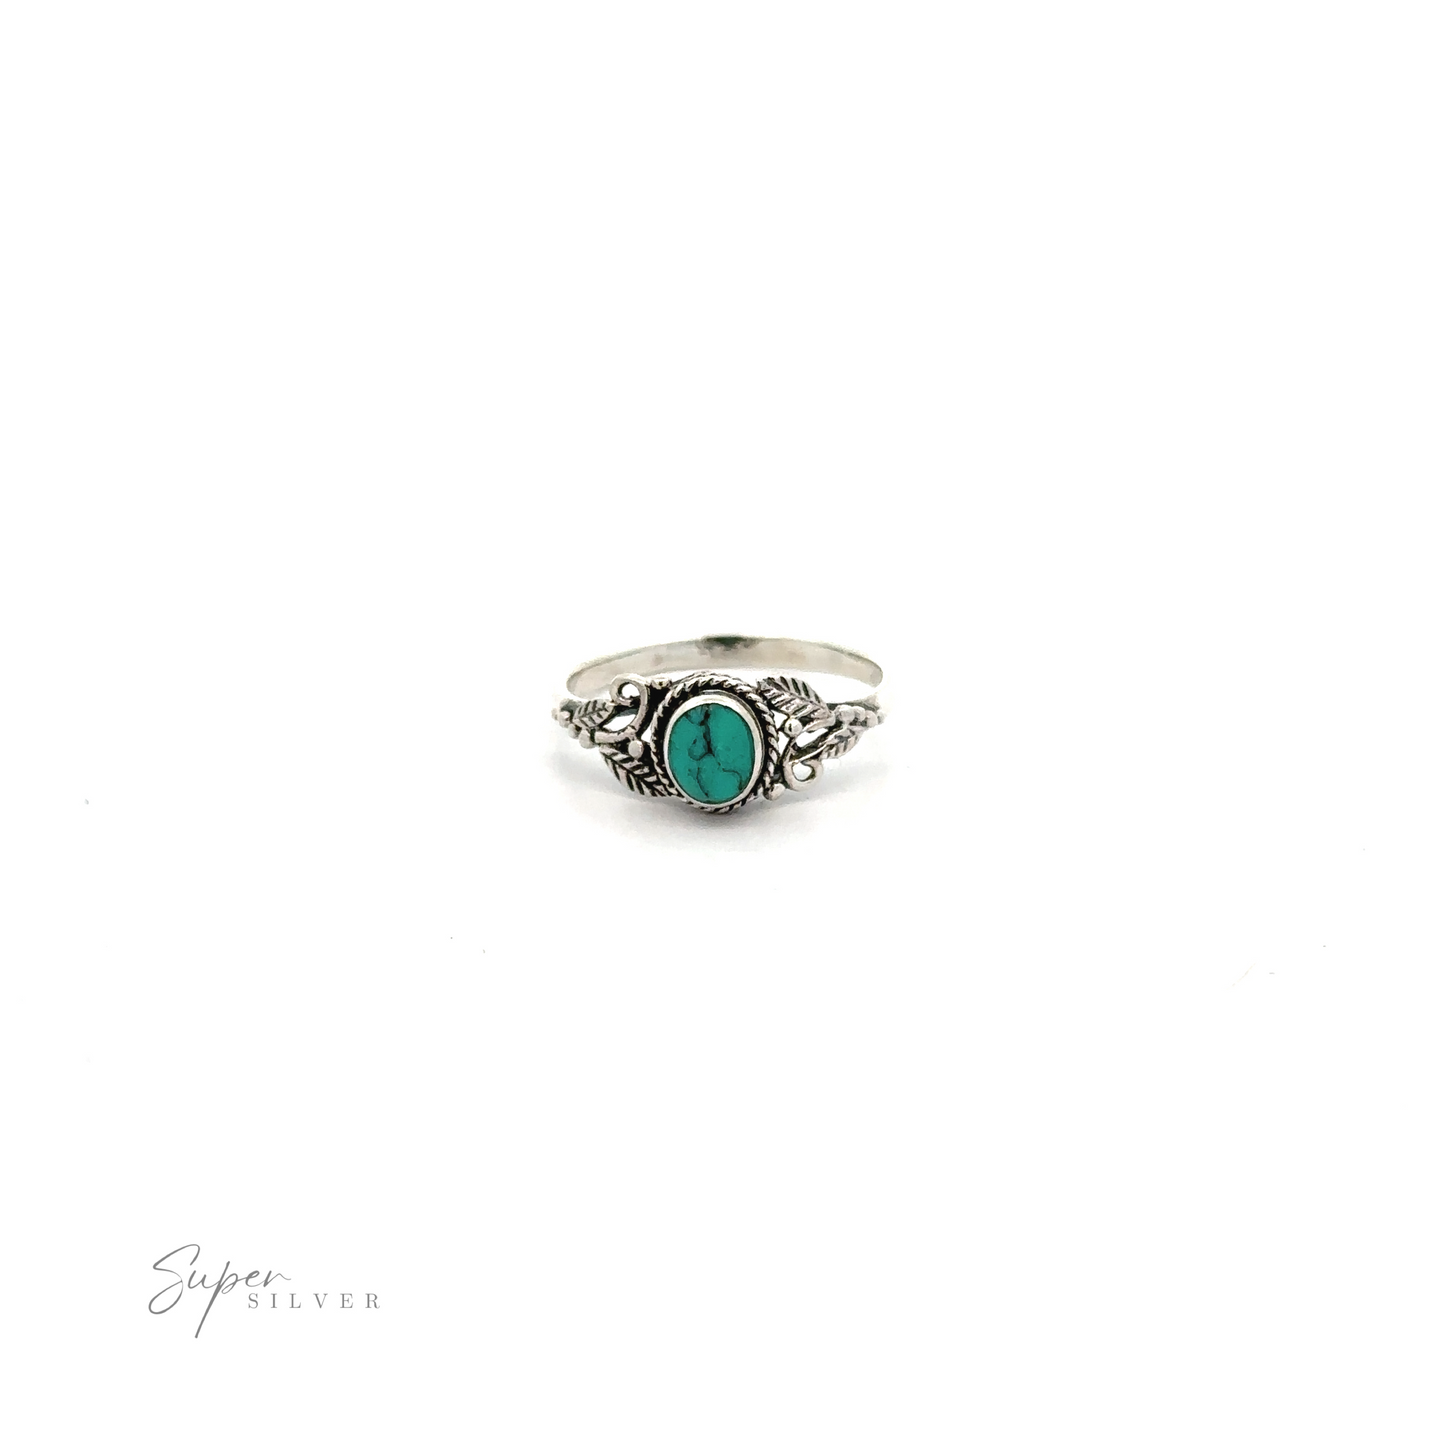 .925 Sterling Silver Turquoise Stone Ring with Leaves on a white background.